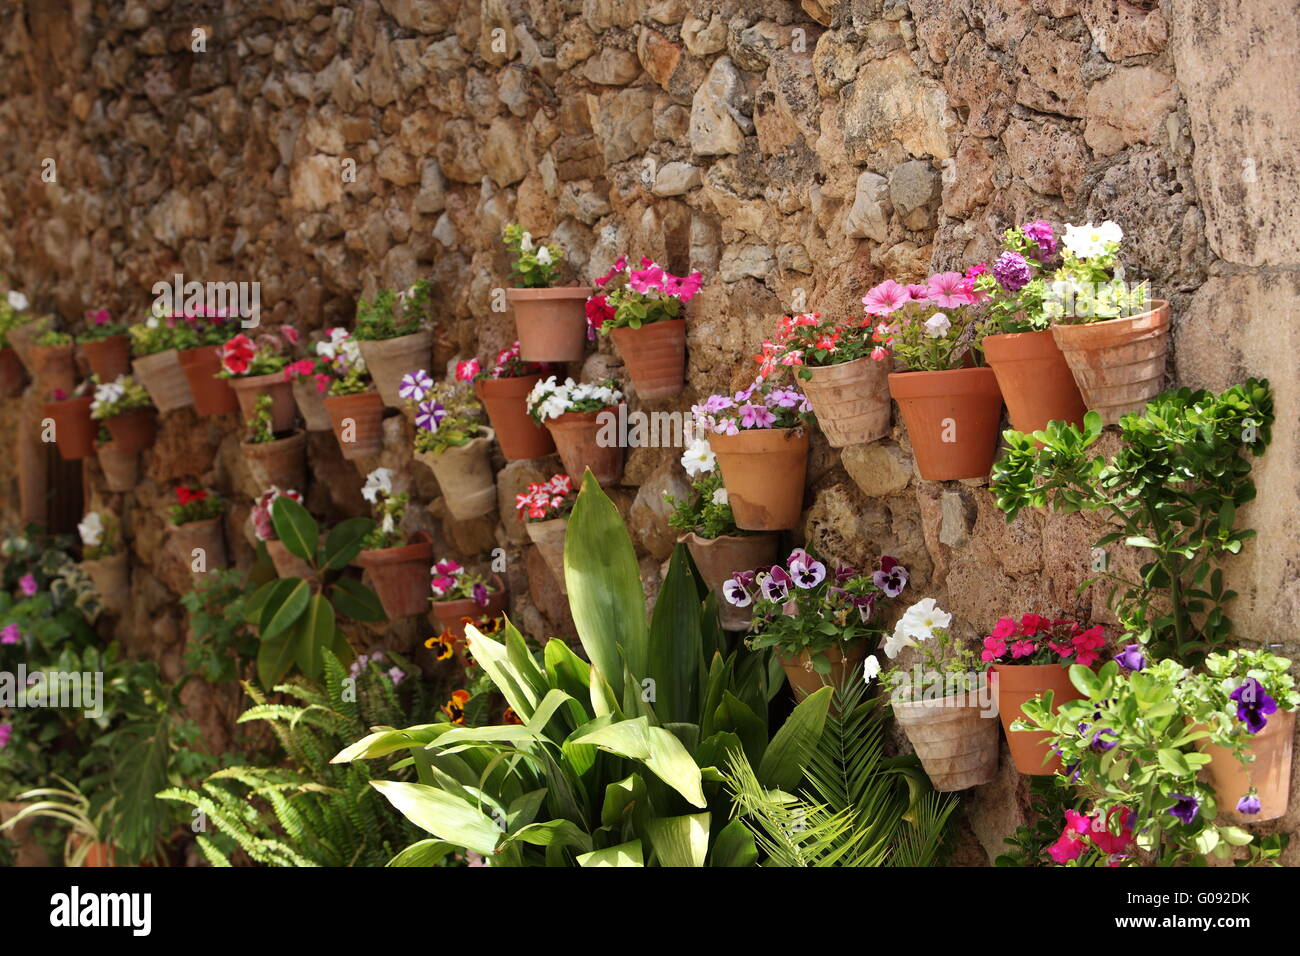 Colourful array of potted flowering plants Stock Photo